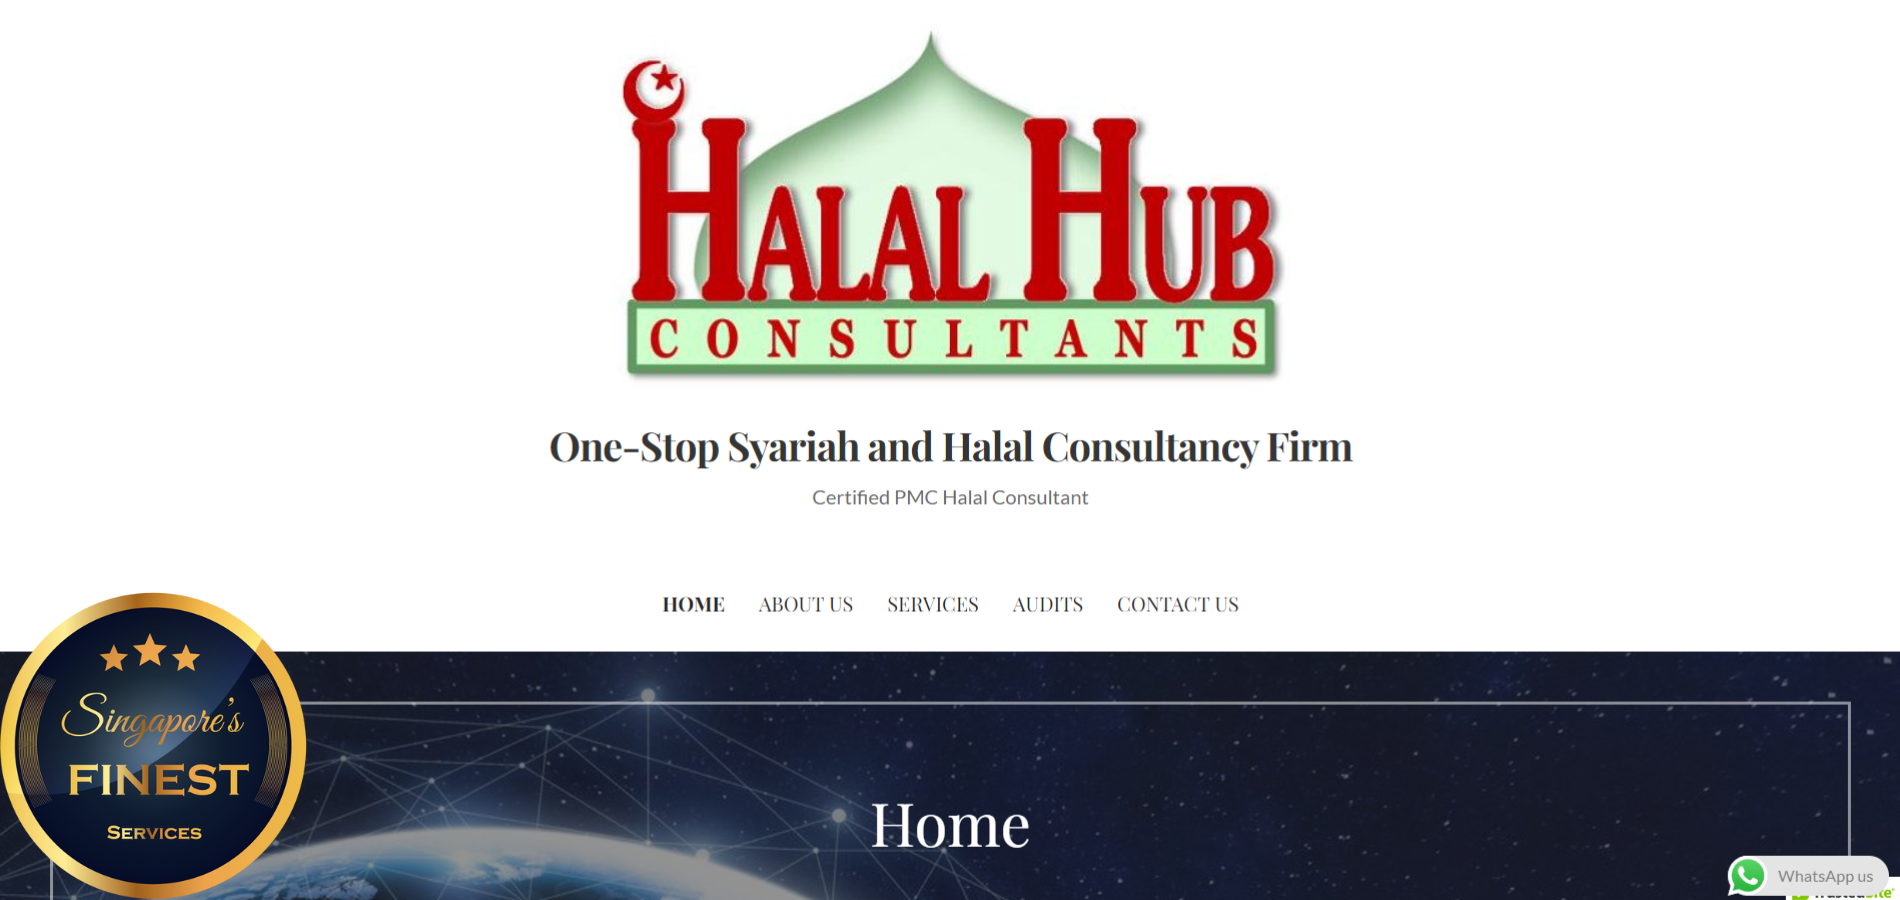 The Finest Halal Certification Consultants in Singapore